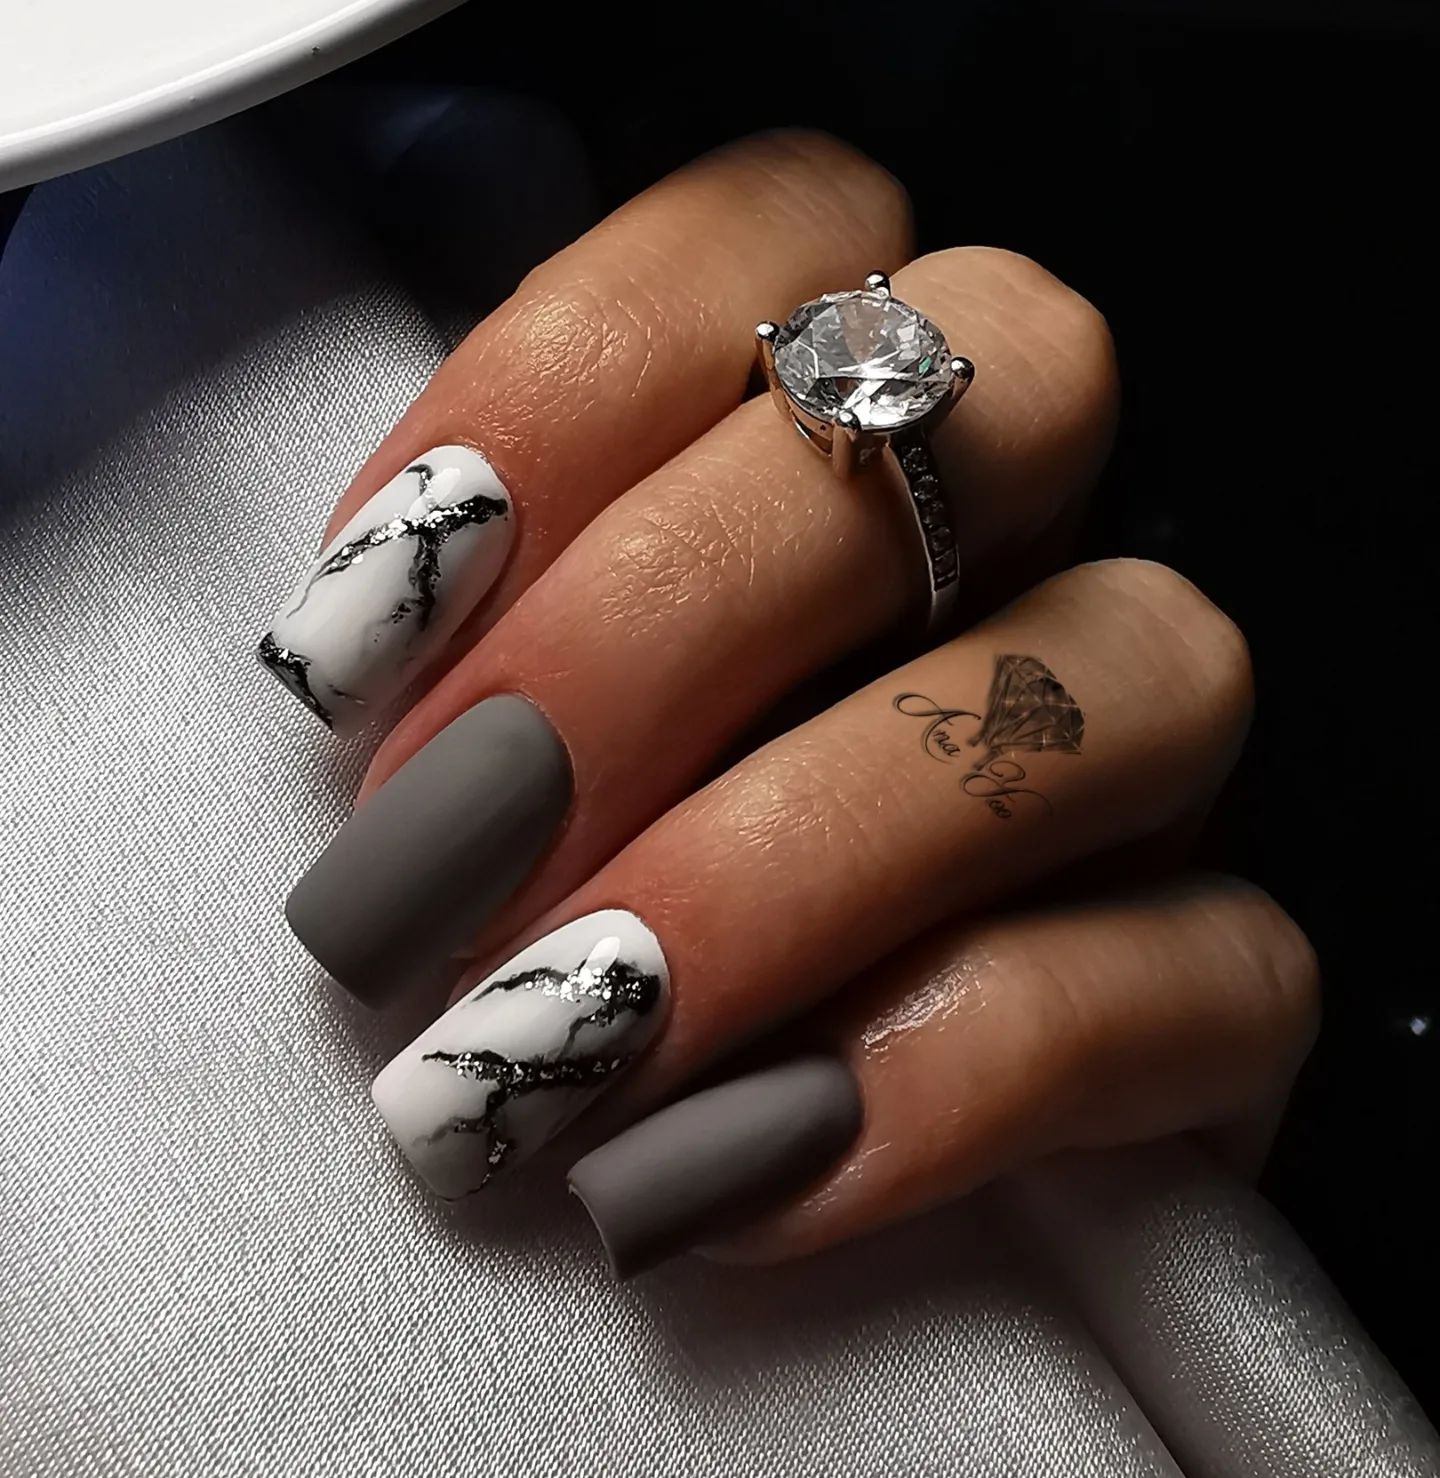 If you are a modest and sophisticated person, grey nail color is definitely for you! Dark matte grey nails will help you shine with your square mani. For accent nails, marble nail art which continues to grow in popularity is a great choice to combine.